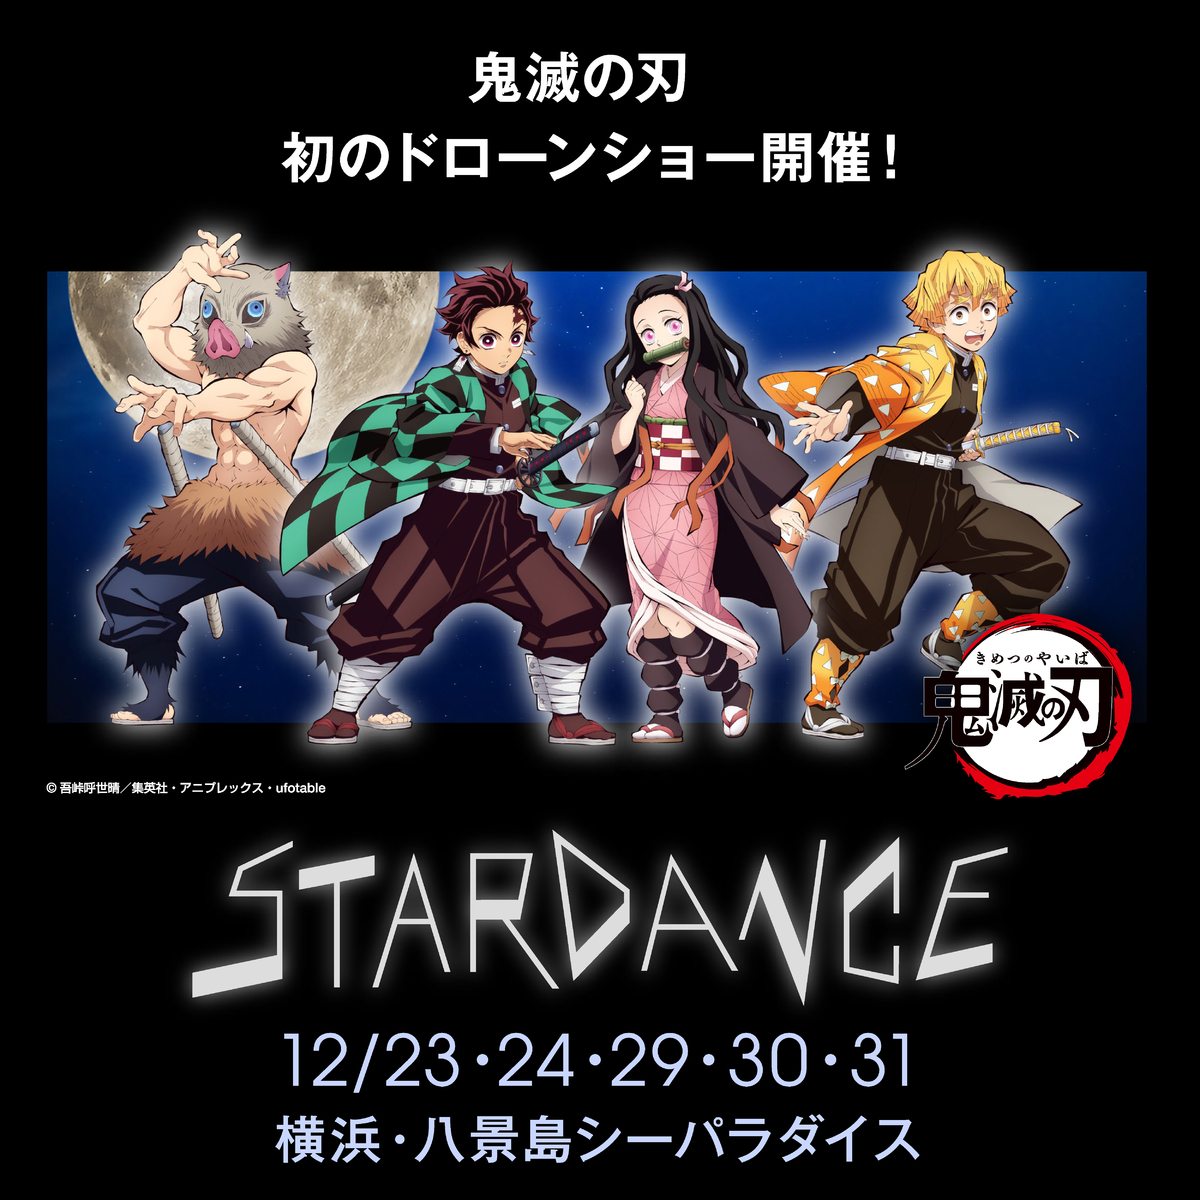 STARDANCE in 横浜・八景島シーパラダイス』のドローンショーに「鬼滅 